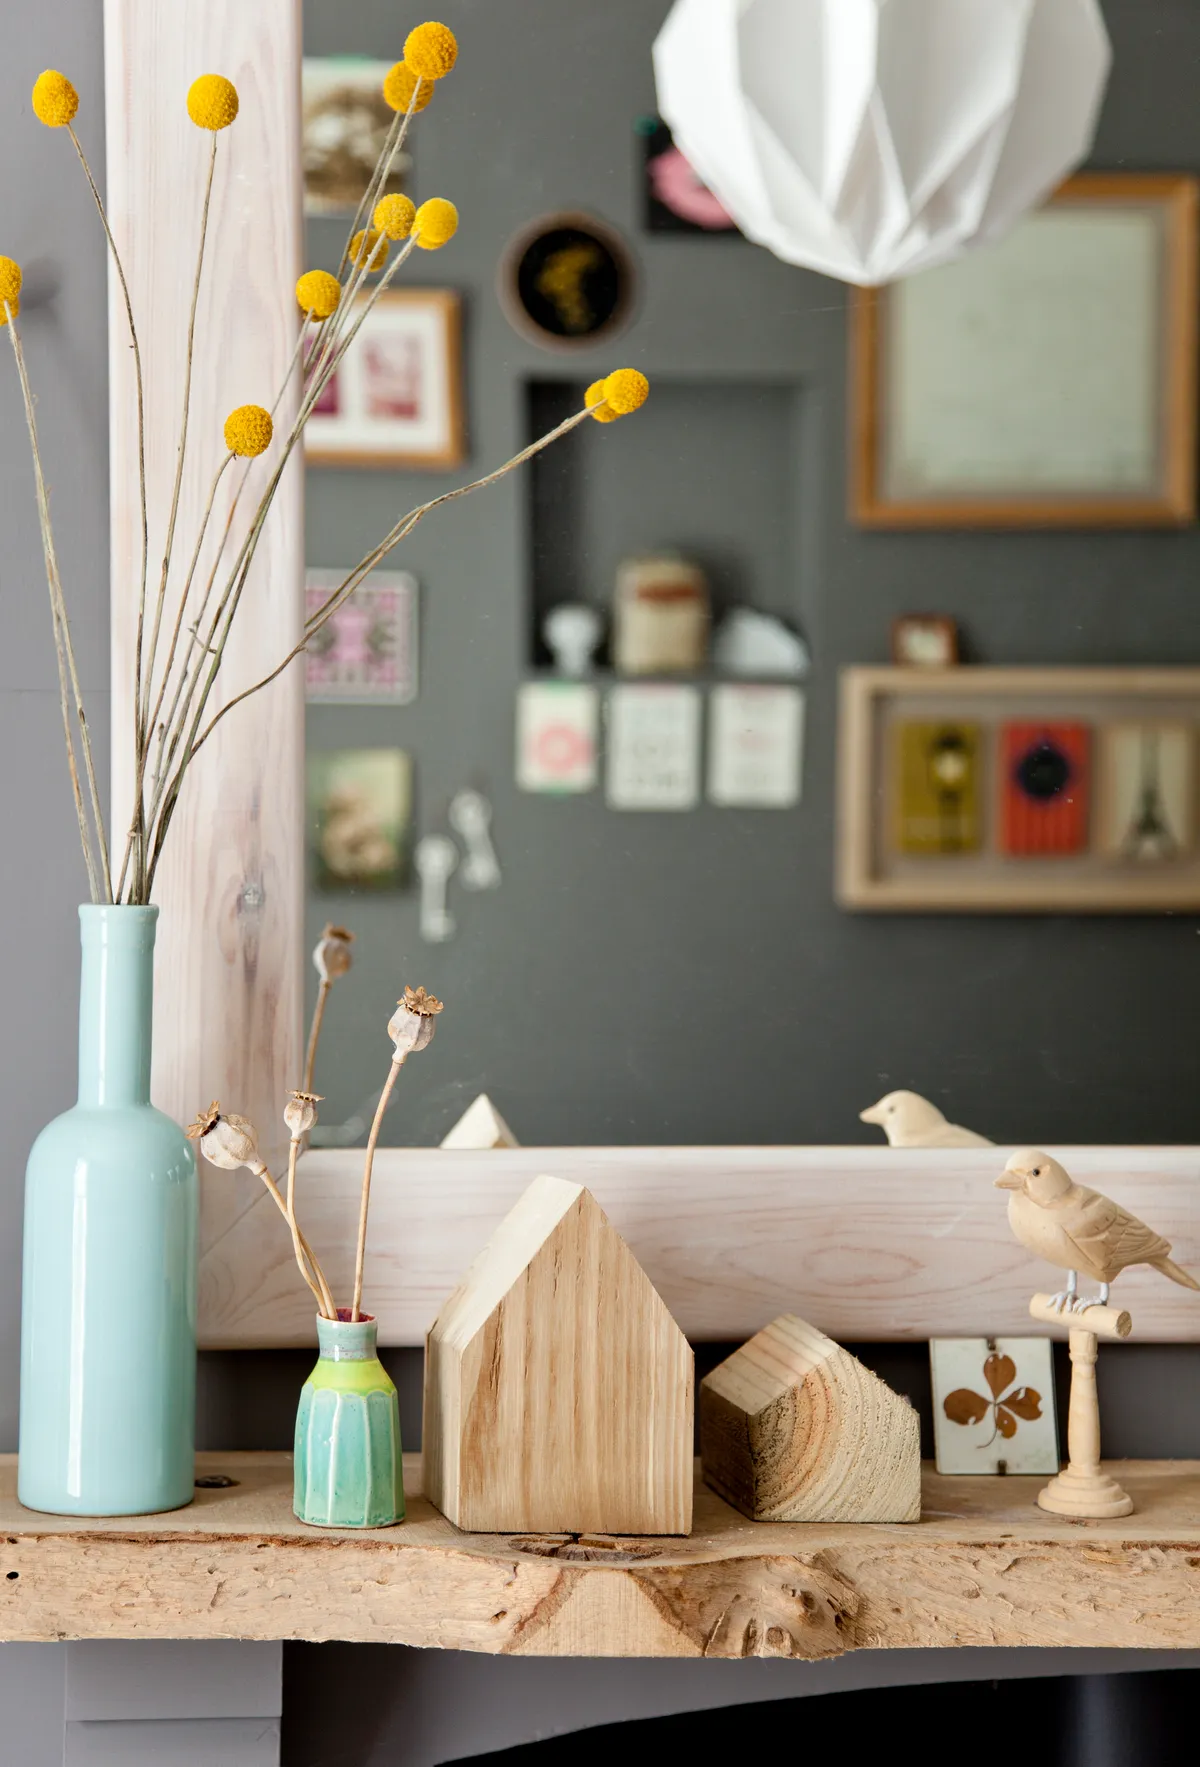 Natural wooden ornaments and a blue vase full of dried yellow flowers